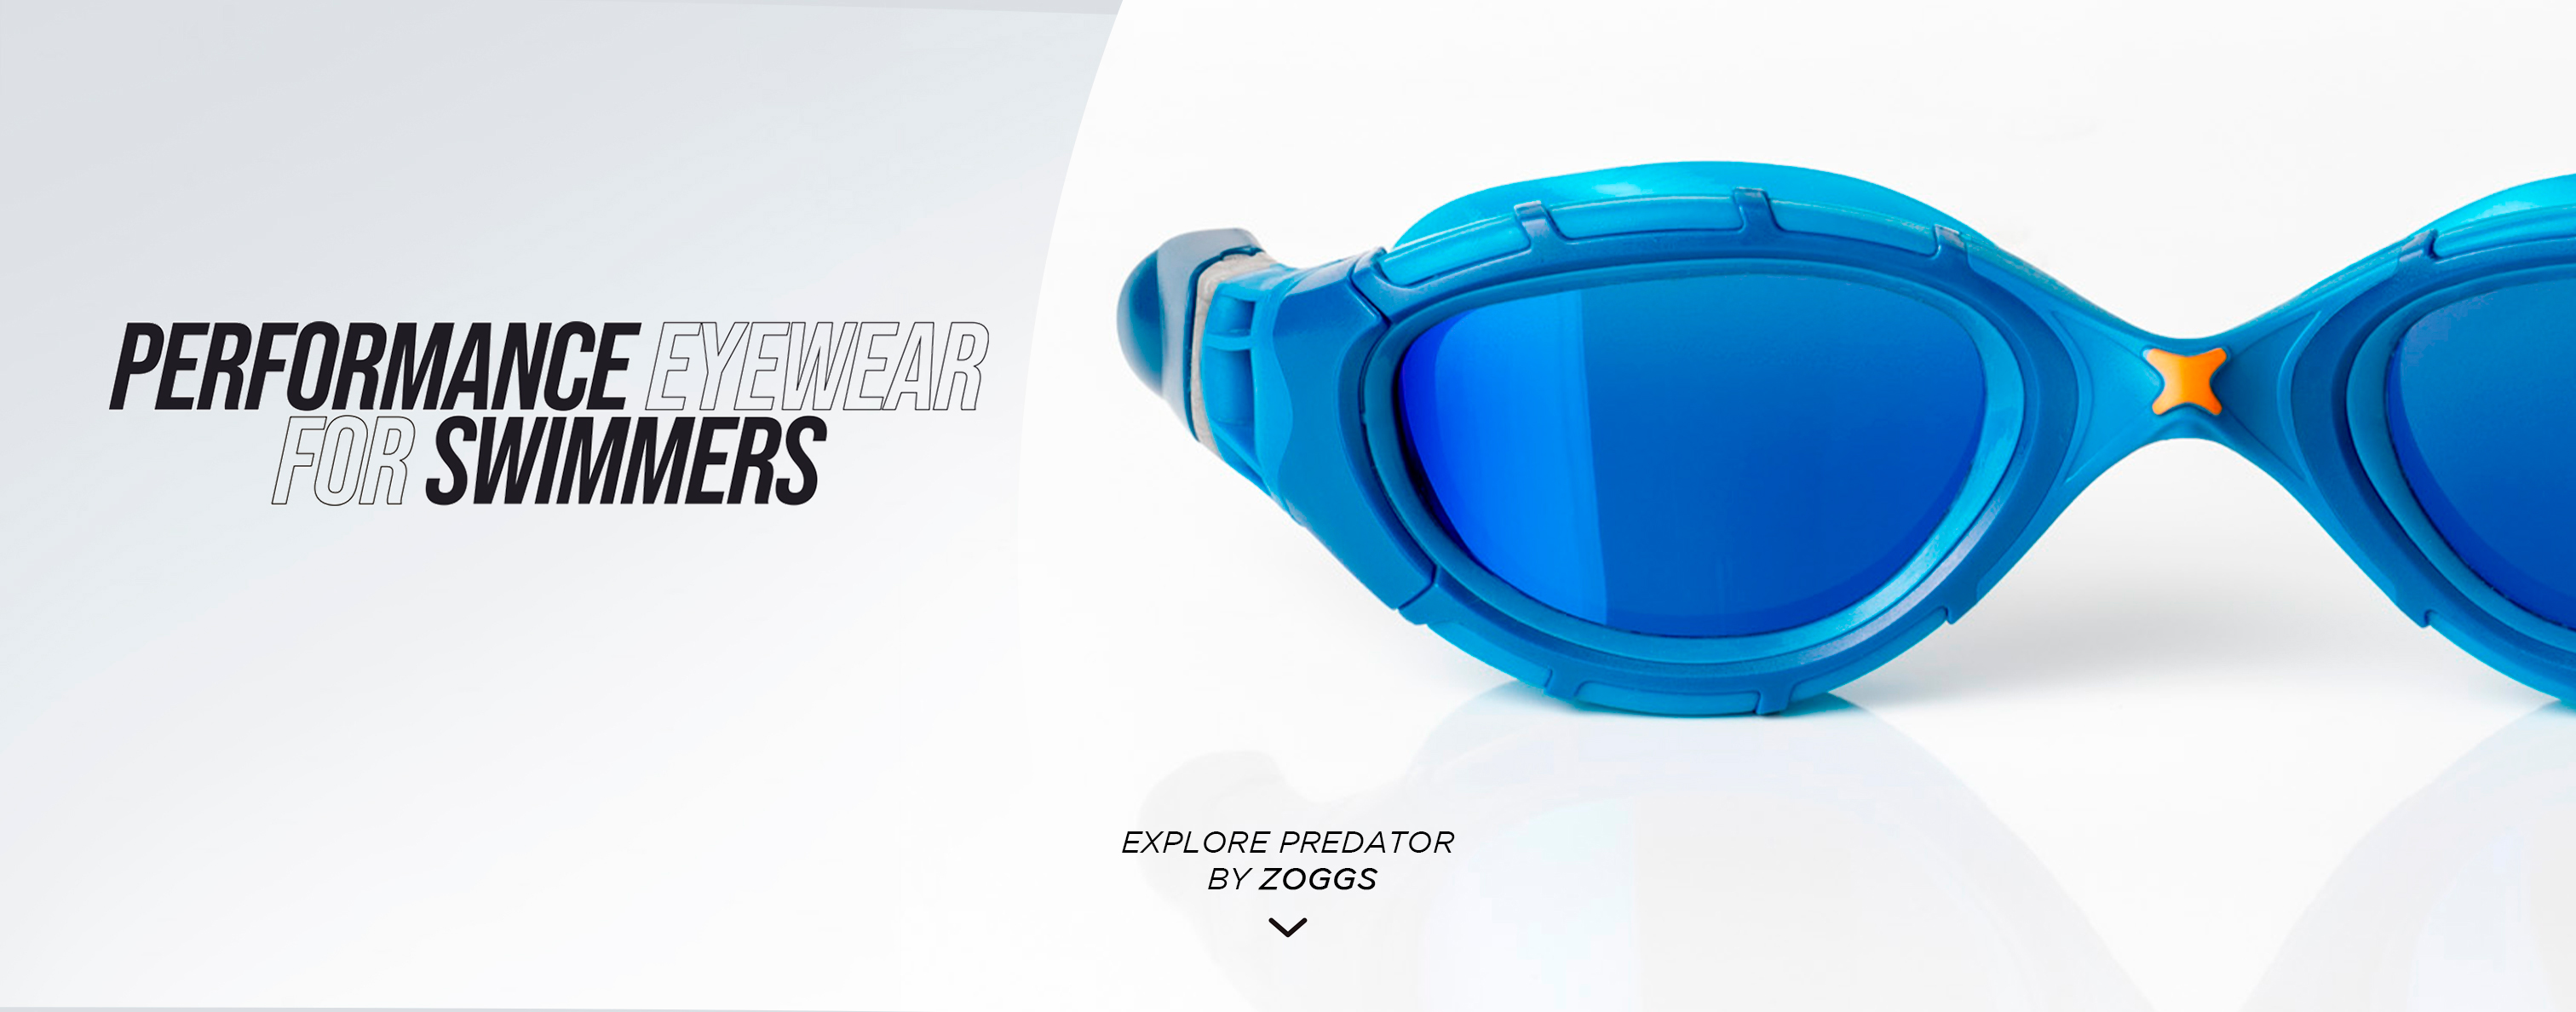 Perfromance eyewear for swimmers